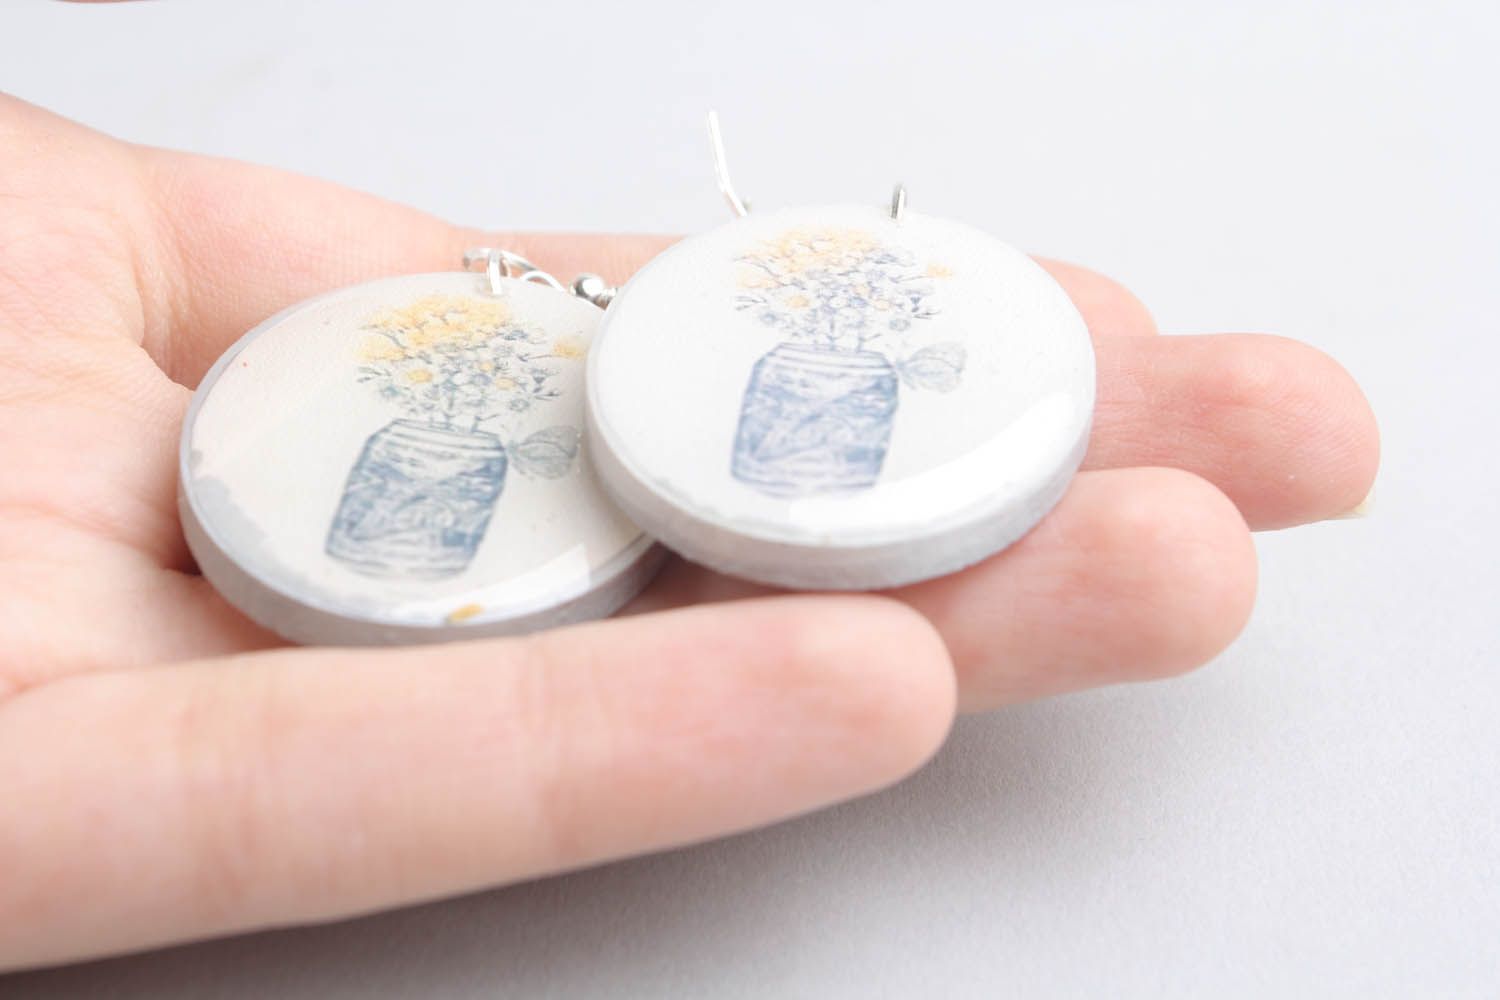 Earrings made of wood and epoxy resin photo 2